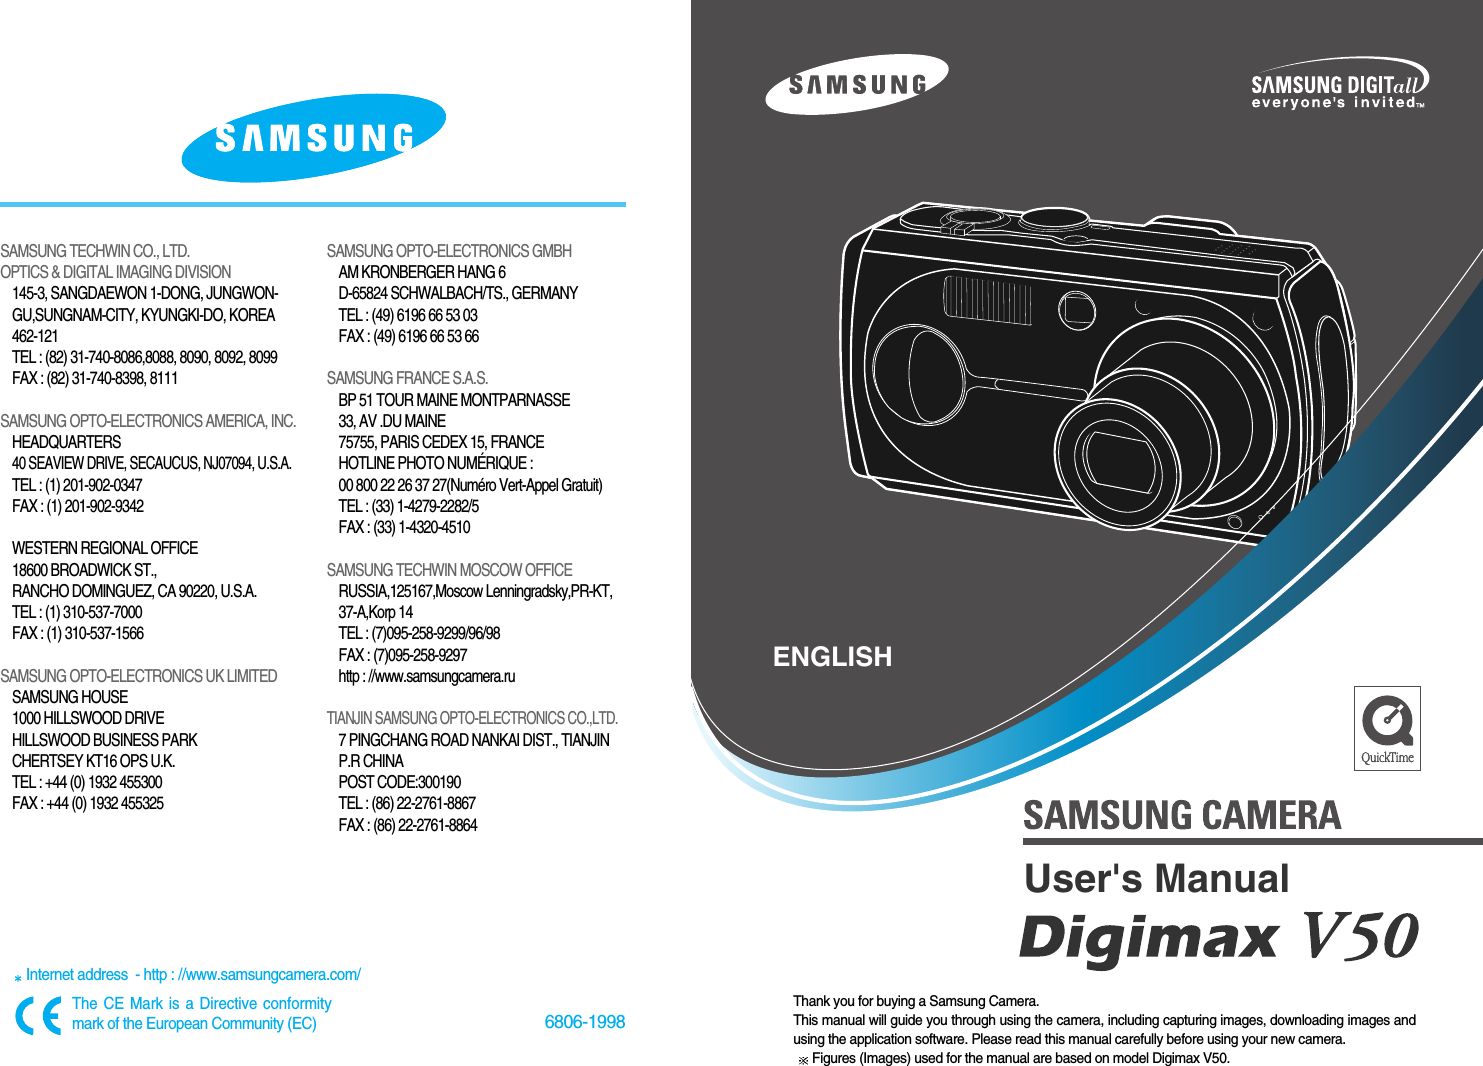 6806-1998SAMSUNG TECHWIN CO., LTD.OPTICS &amp; DIGITAL IMAGING DIVISION145-3, SANGDAEWON 1-DONG, JUNGWON-GU,SUNGNAM-CITY, KYUNGKI-DO, KOREA462-121TEL : (82) 31-740-8086,8088, 8090, 8092, 8099FAX : (82) 31-740-8398, 8111SAMSUNG OPTO-ELECTRONICS AMERICA, INC.HEADQUARTERS 40 SEAVIEW DRIVE, SECAUCUS, NJ07094, U.S.A.TEL : (1) 201-902-0347FAX : (1) 201-902-9342WESTERN REGIONAL OFFICE18600 BROADWICK ST., RANCHO DOMINGUEZ, CA 90220, U.S.A.TEL : (1) 310-537-7000   FAX : (1) 310-537-1566SAMSUNG OPTO-ELECTRONICS UK LIMITED SAMSUNG HOUSE1000 HILLSWOOD DRIVEHILLSWOOD BUSINESS PARKCHERTSEY KT16 OPS U.K. TEL : +44 (0) 1932 455300FAX : +44 (0) 1932 455325SAMSUNG OPTO-ELECTRONICS GMBHAM KRONBERGER HANG 6D-65824 SCHWALBACH/TS., GERMANYTEL : (49) 6196 66 53 03FAX : (49) 6196 66 53 66SAMSUNG FRANCE S.A.S.BP 51 TOUR MAINE MONTPARNASSE 33, AV .DU MAINE 75755, PARIS CEDEX 15, FRANCEHOTLINE PHOTO NUMÉRIQUE : 00 800 22 26 37 27(Numéro Vert-Appel Gratuit)TEL : (33) 1-4279-2282/5   FAX : (33) 1-4320-4510SAMSUNG TECHWIN MOSCOW OFFICE RUSSIA,125167,Moscow Lenningradsky,PR-KT,37-A,Korp 14TEL : (7)095-258-9299/96/98FAX : (7)095-258-9297http : //www.samsungcamera.ruTIANJIN SAMSUNG OPTO-ELECTRONICS CO.,LTD.7 PINGCHANG ROAD NANKAI DIST., TIANJINP.R CHINAPOST CODE:300190TEL : (86) 22-2761-8867FAX : (86) 22-2761-8864Internet address  - http : //www.samsungcamera.com/The CE Mark is a Directive conformitymark of the European Community (EC)Thank you for buying a Samsung Camera.This manual will guide you through using the camera, including capturing images, downloading images andusing the application software. Please read this manual carefully before using your new camera.Figures (Images) used for the manual are based on model Digimax V50.ENGLISHUser&apos;s Manual